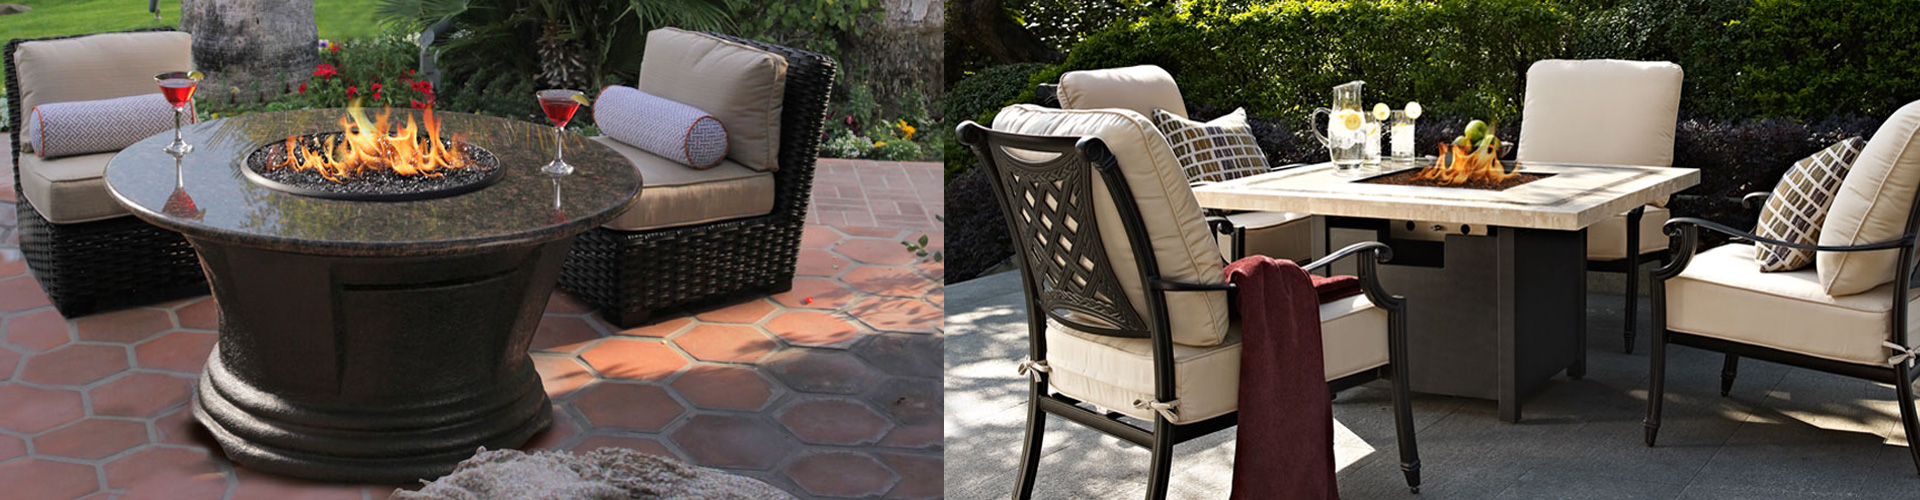 California Outdoor Concepts Fire Pits